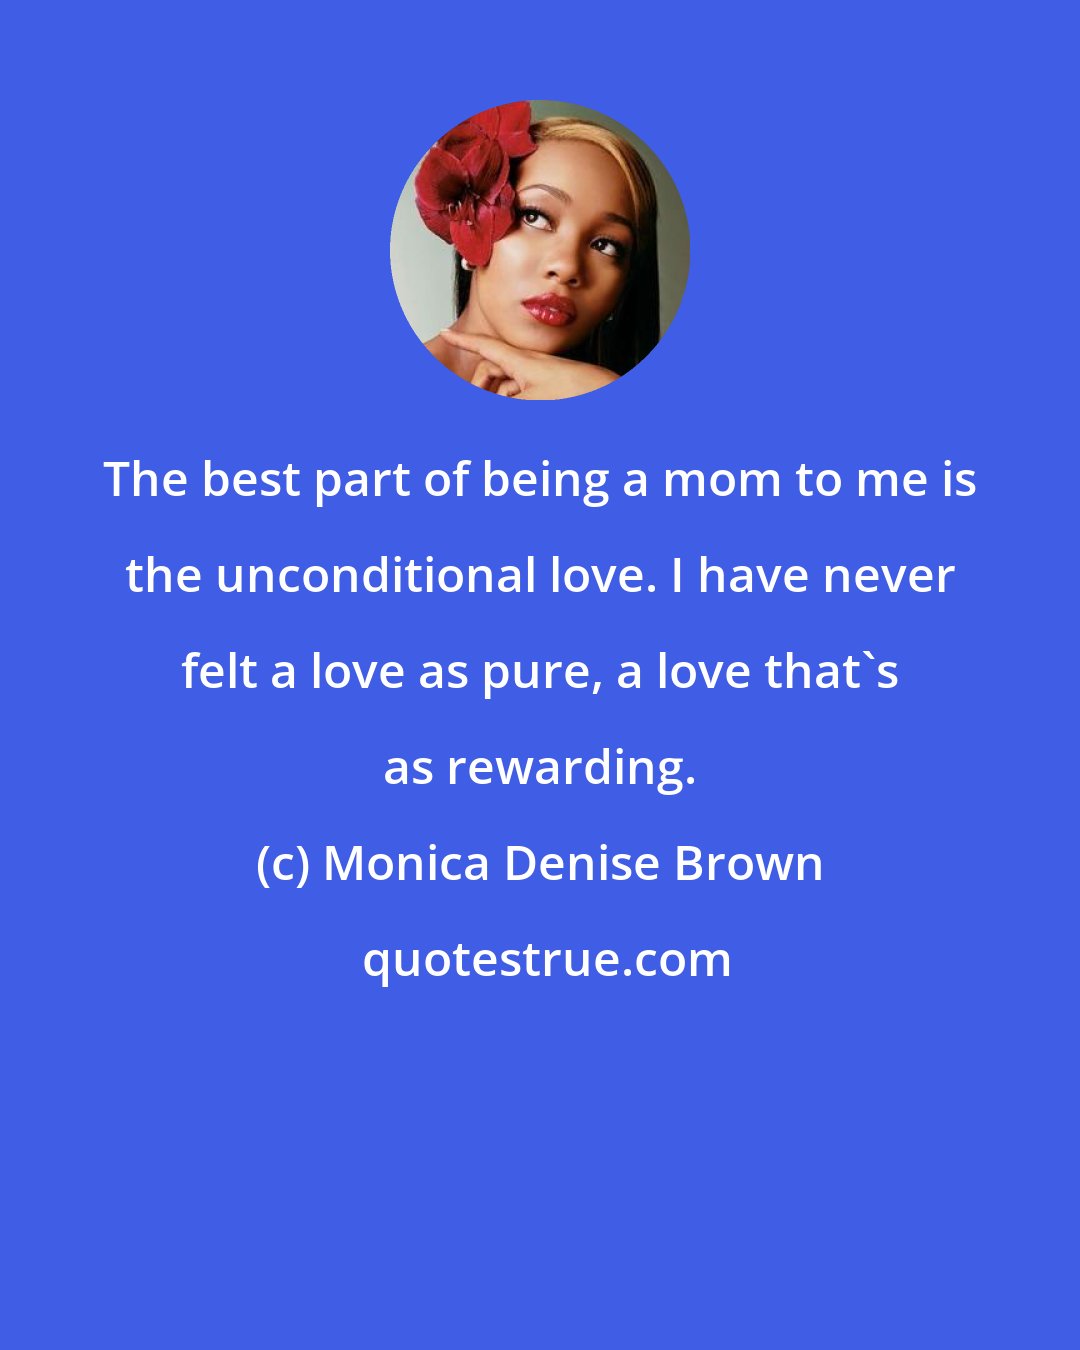 Monica Denise Brown: The best part of being a mom to me is the unconditional love. I have never felt a love as pure, a love that's as rewarding.